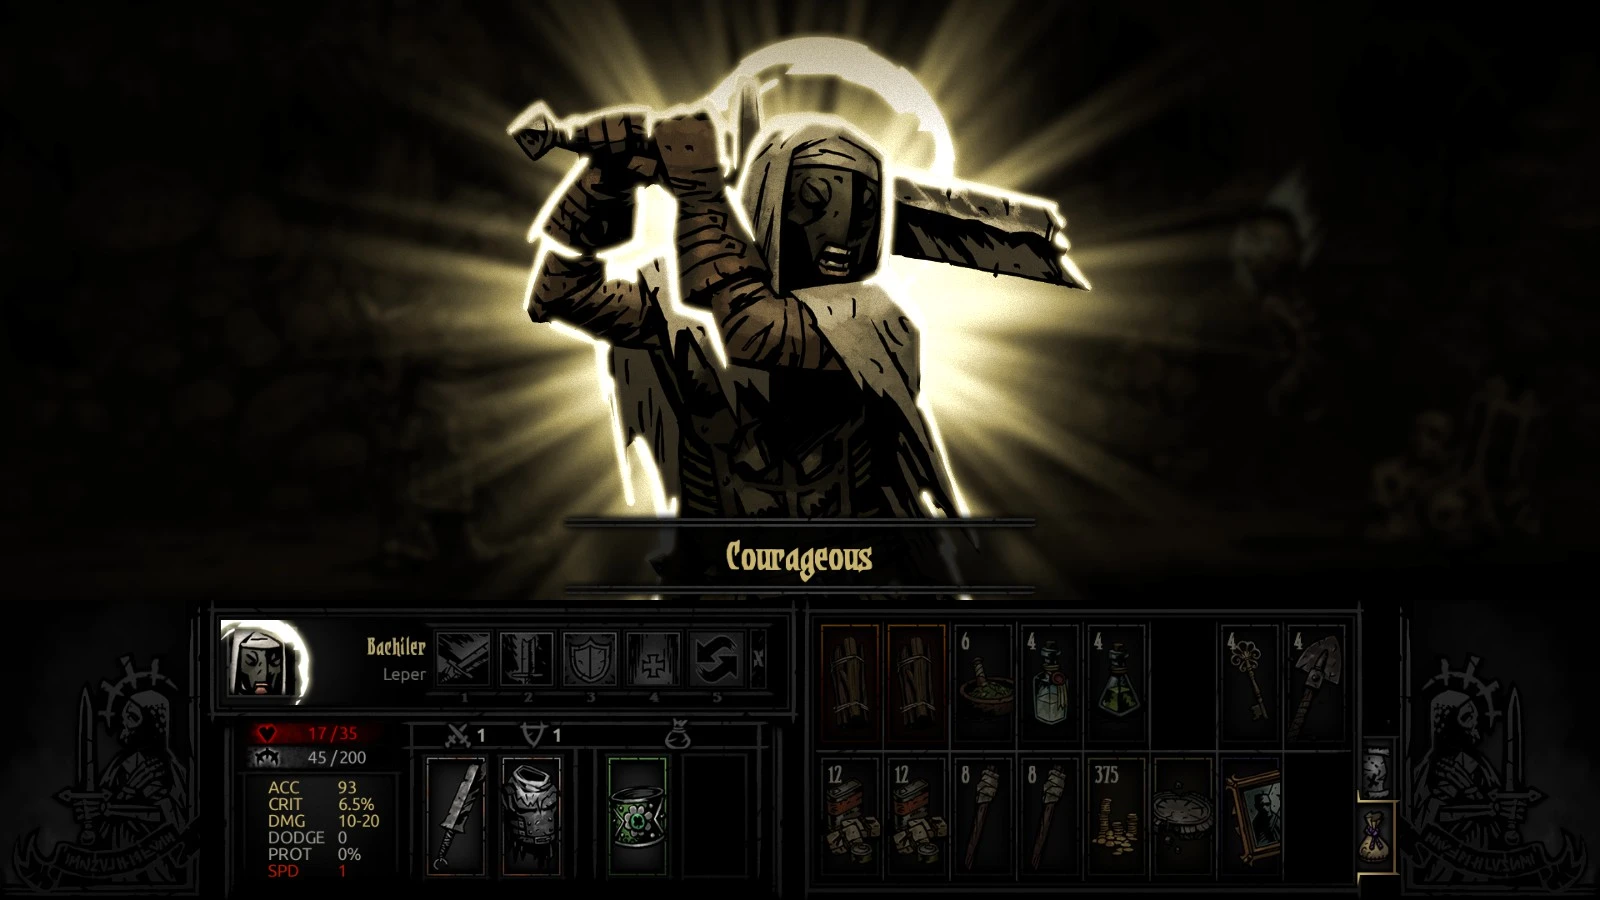 virtue remains after camping in darkest dungeon?